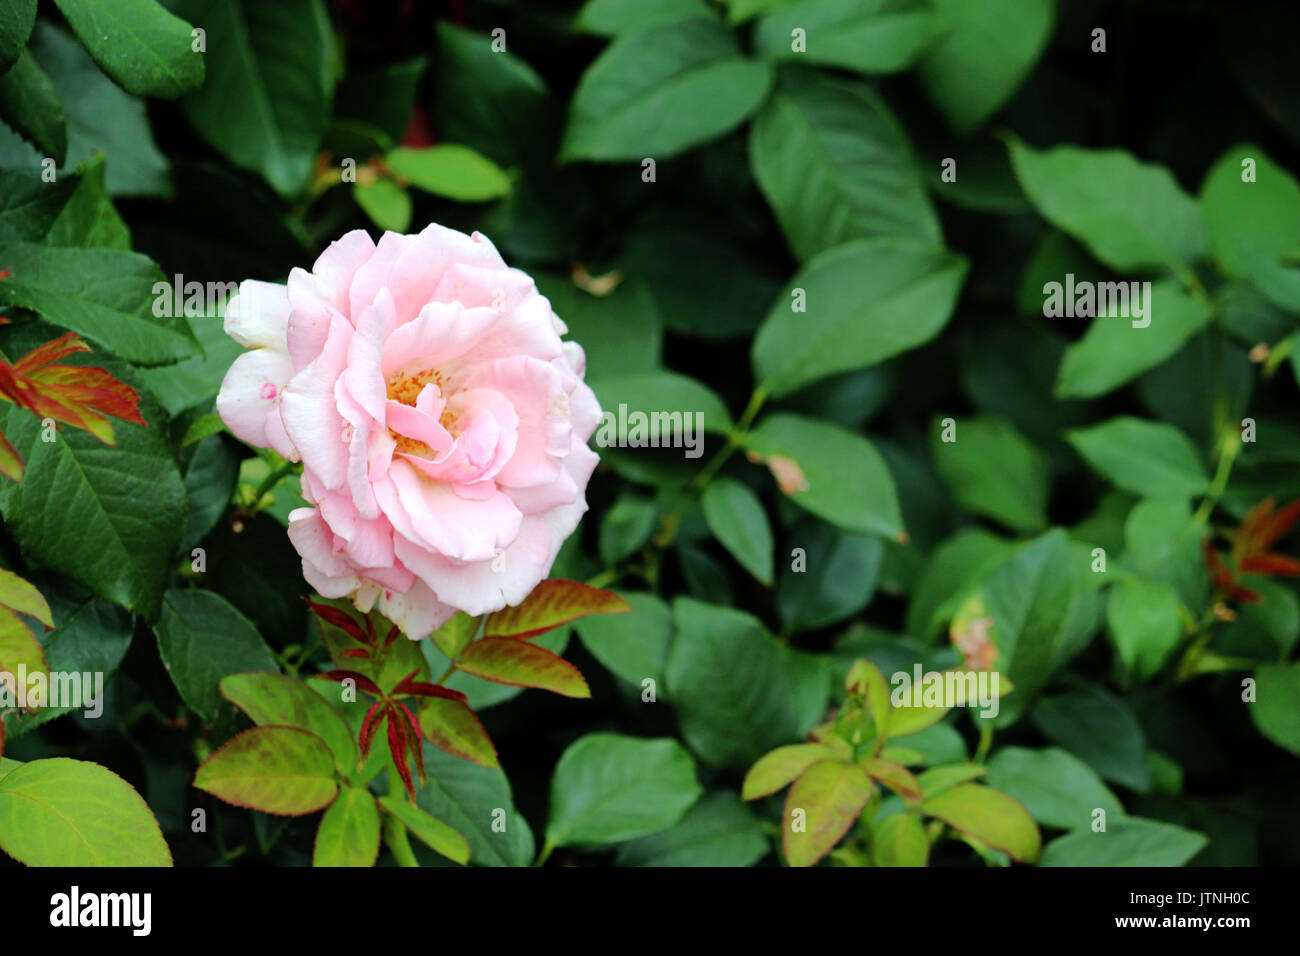 A single light pink rose among leaves of the rose bush in the garden. Stock Photo